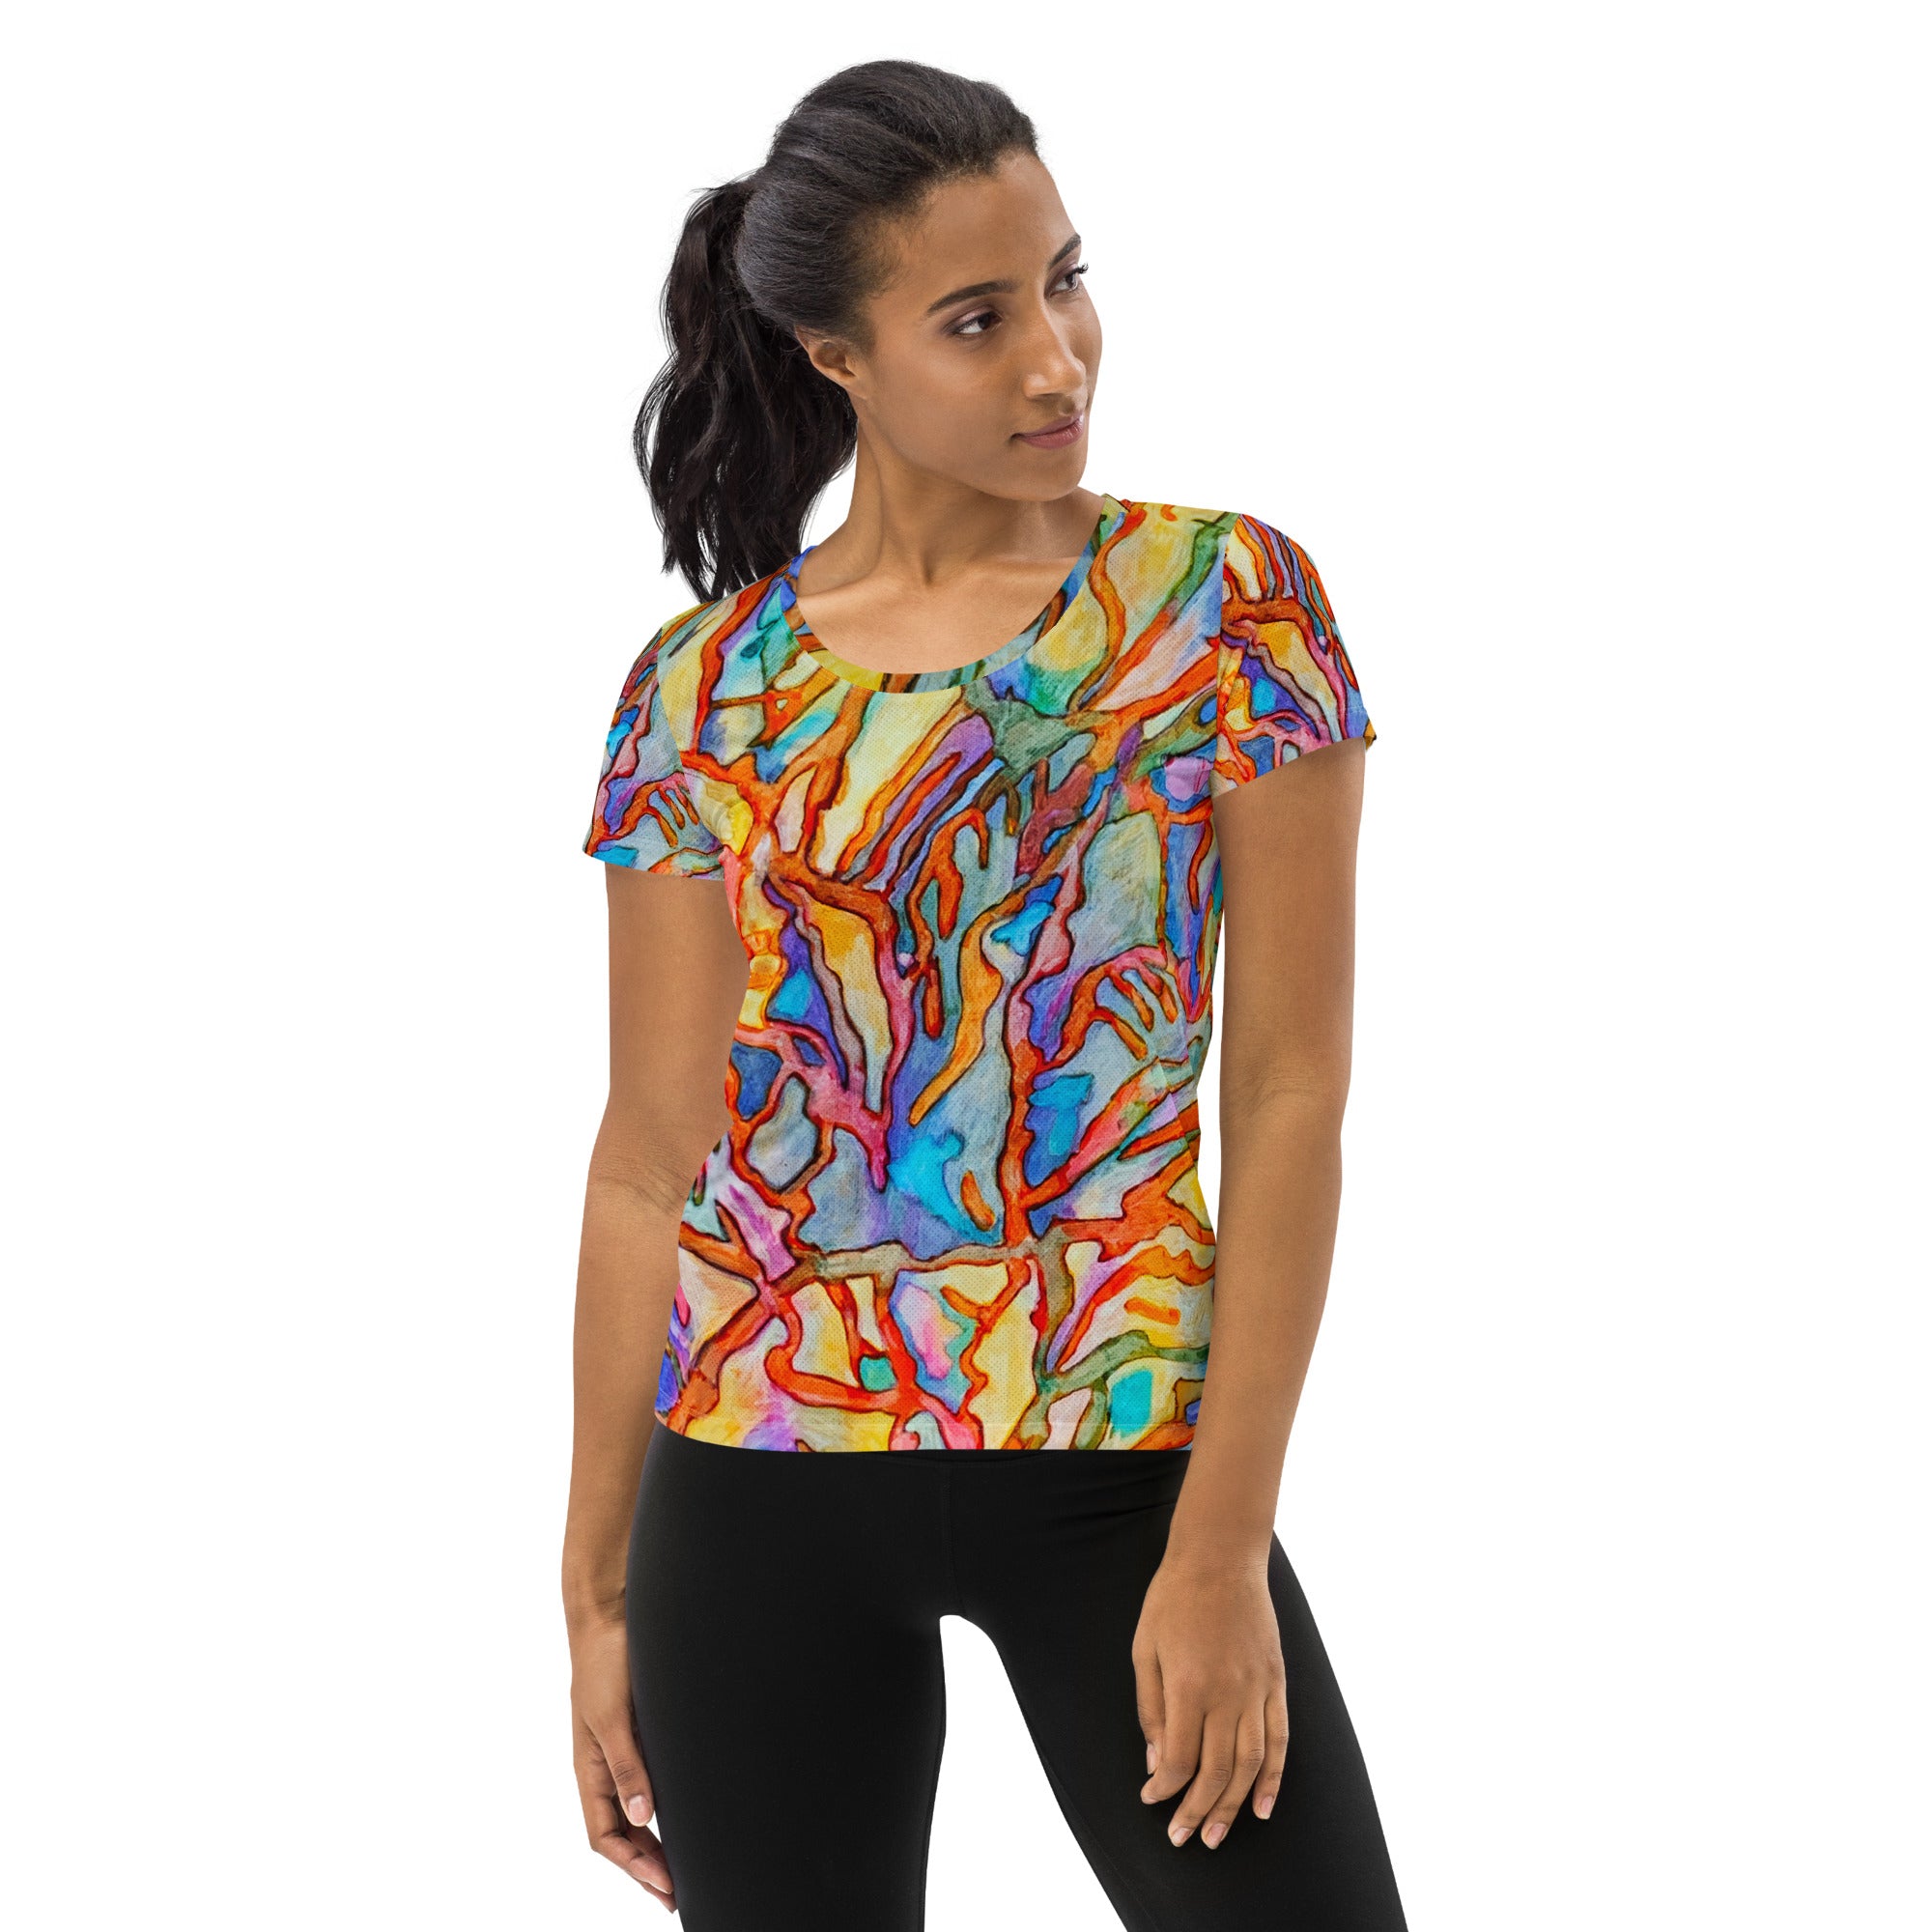 Coral Reef Abstract Women's Athletic T-shirt